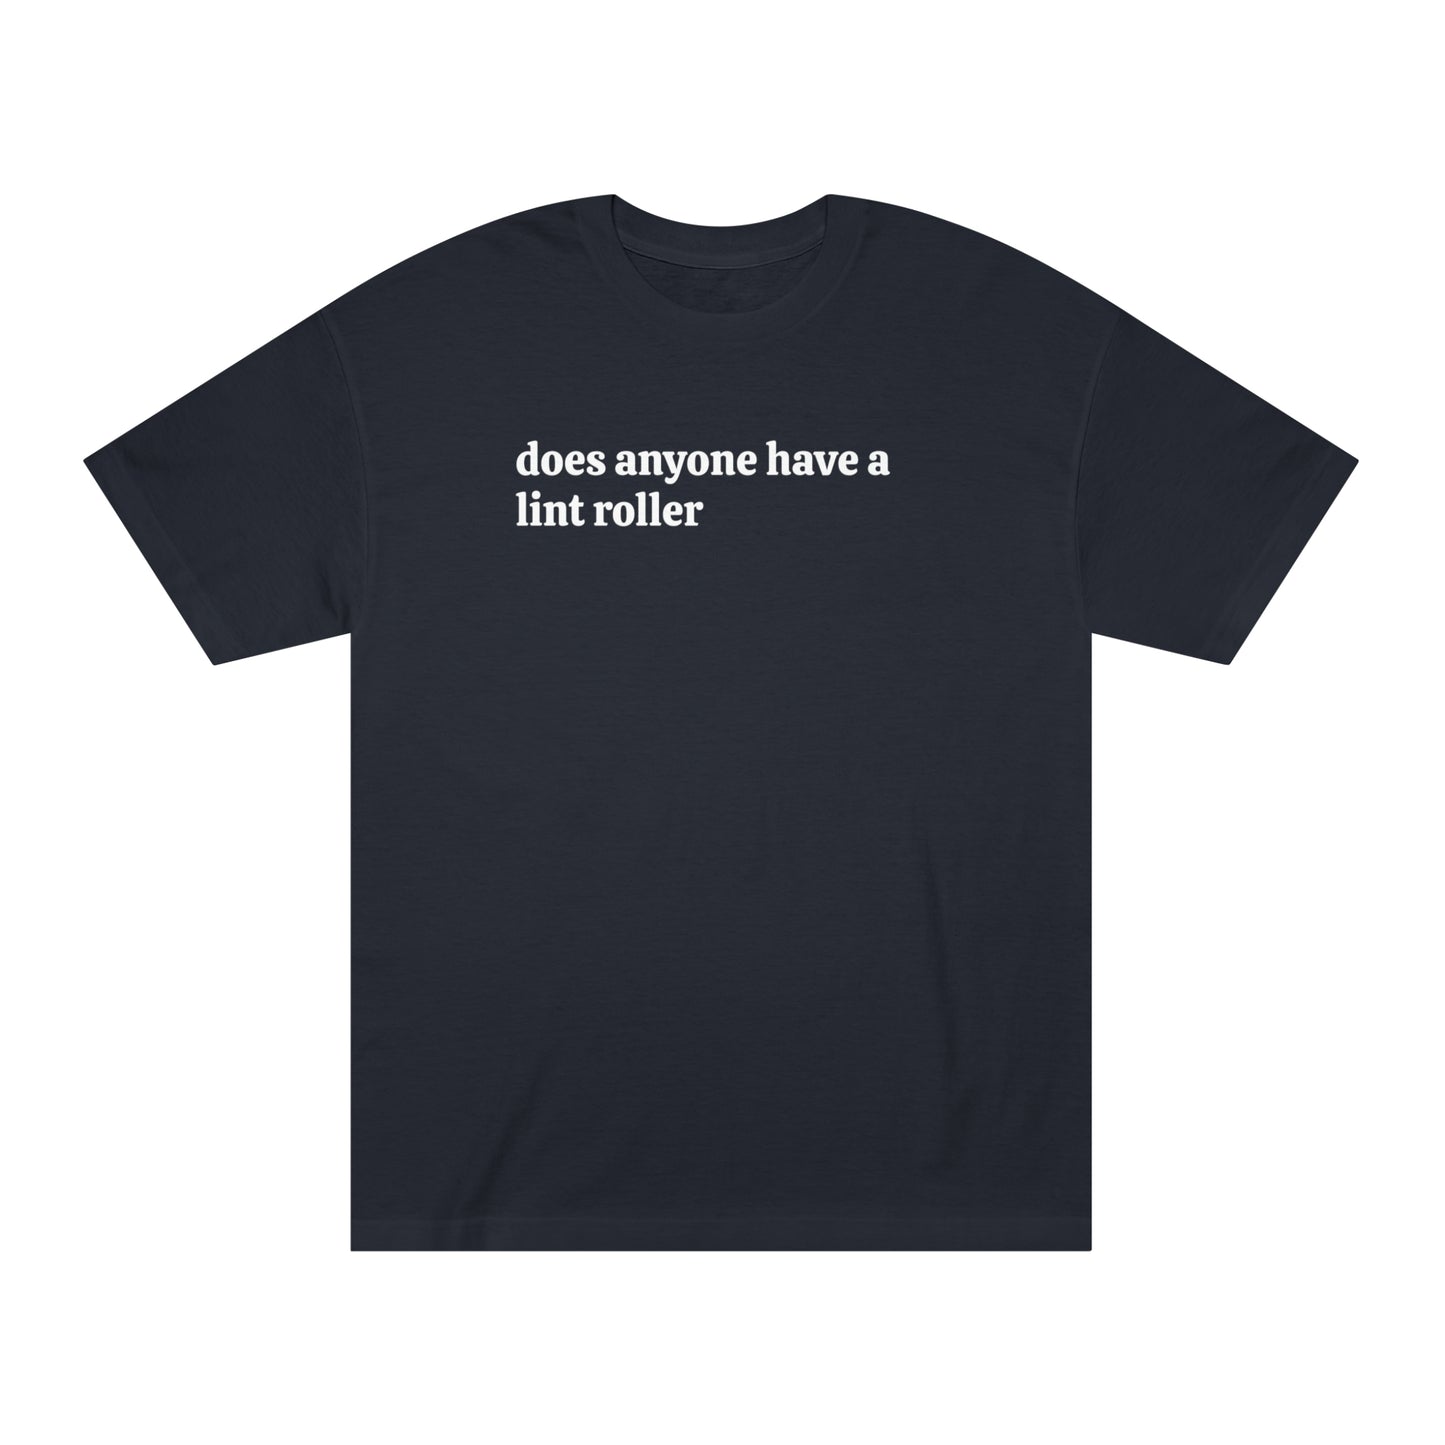 Black T-shirt with humorous phrase 'Does anyone have a lint roller' in white font.